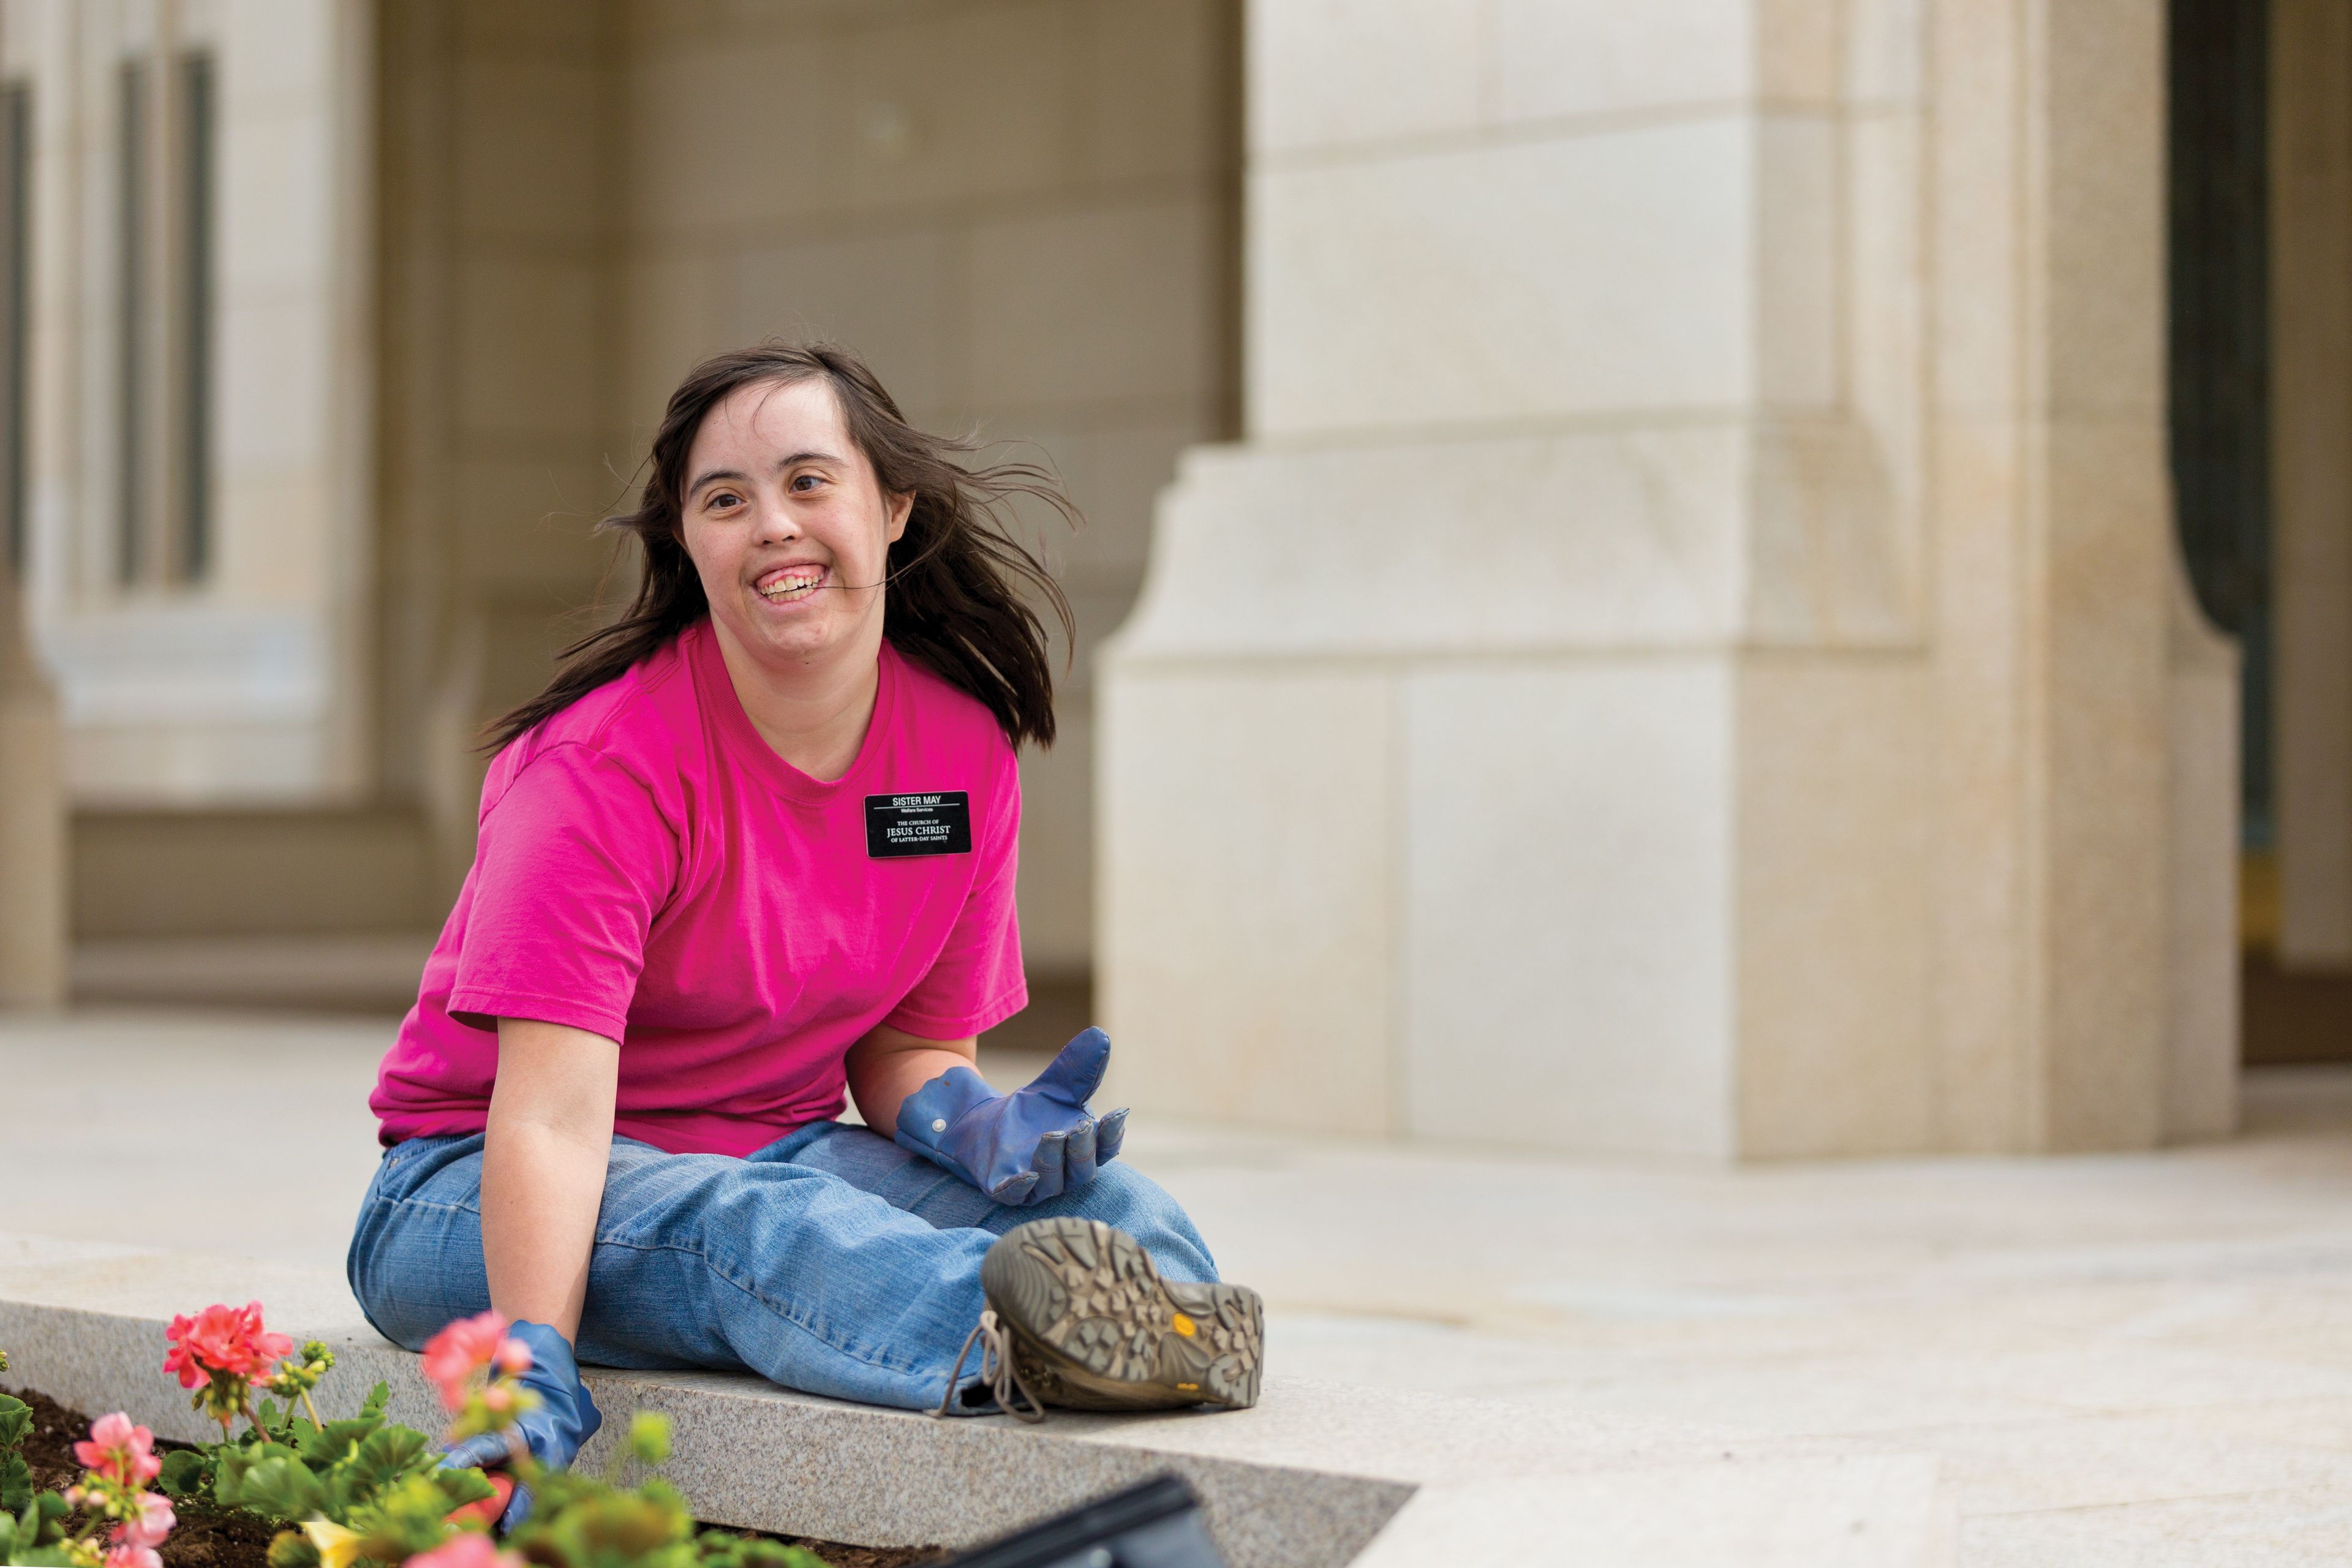 A Church-service missionary works in a flower bed at the Ogden Utah Temple.